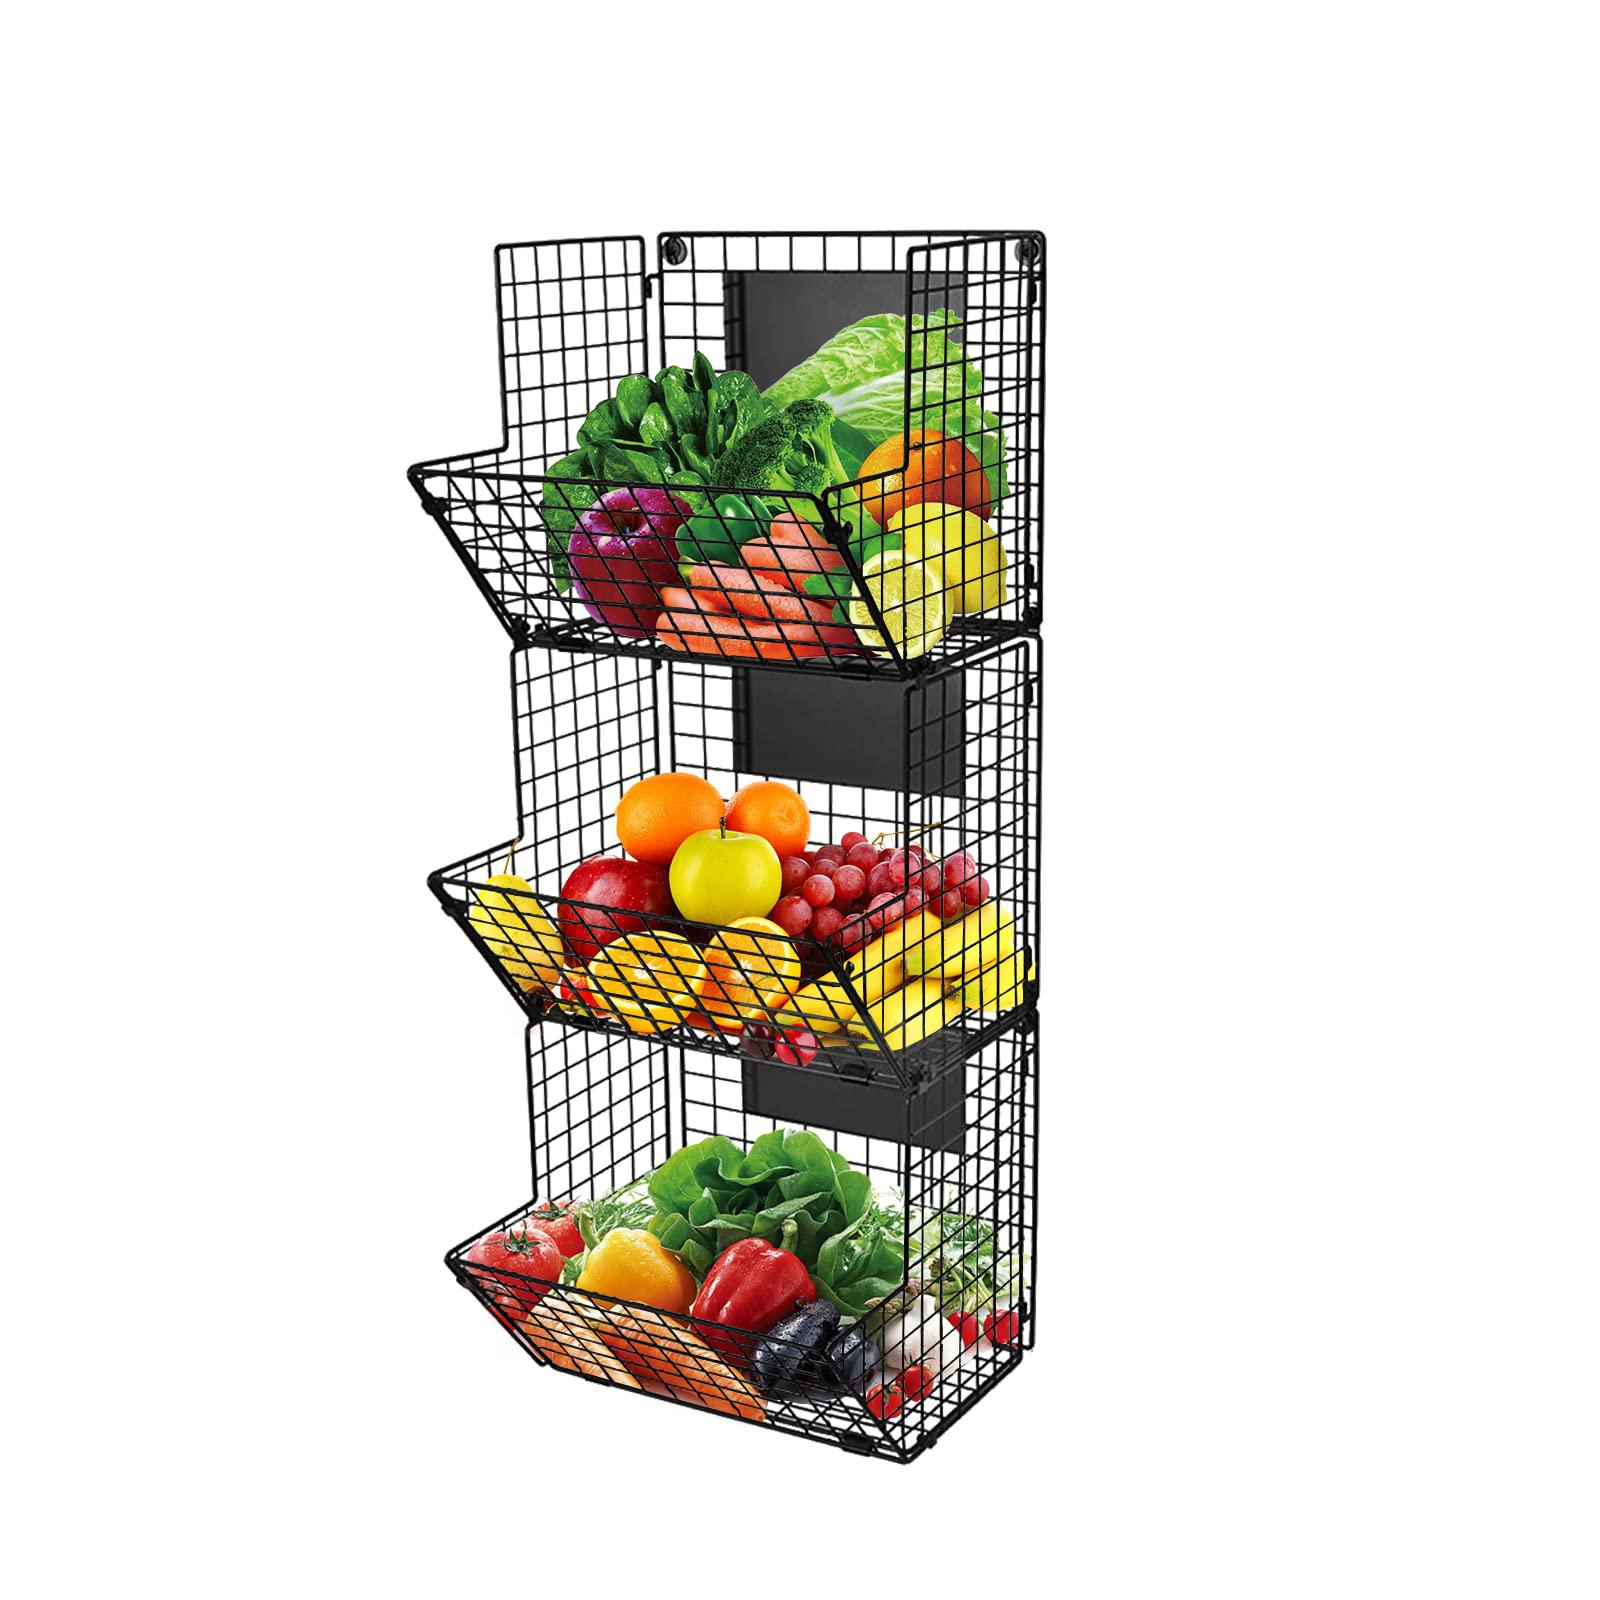 Melody House 3-tier wall mounted storage basket foldable organizer, hanging metal wire basket with chalkboards, kitchen fruit produce pant